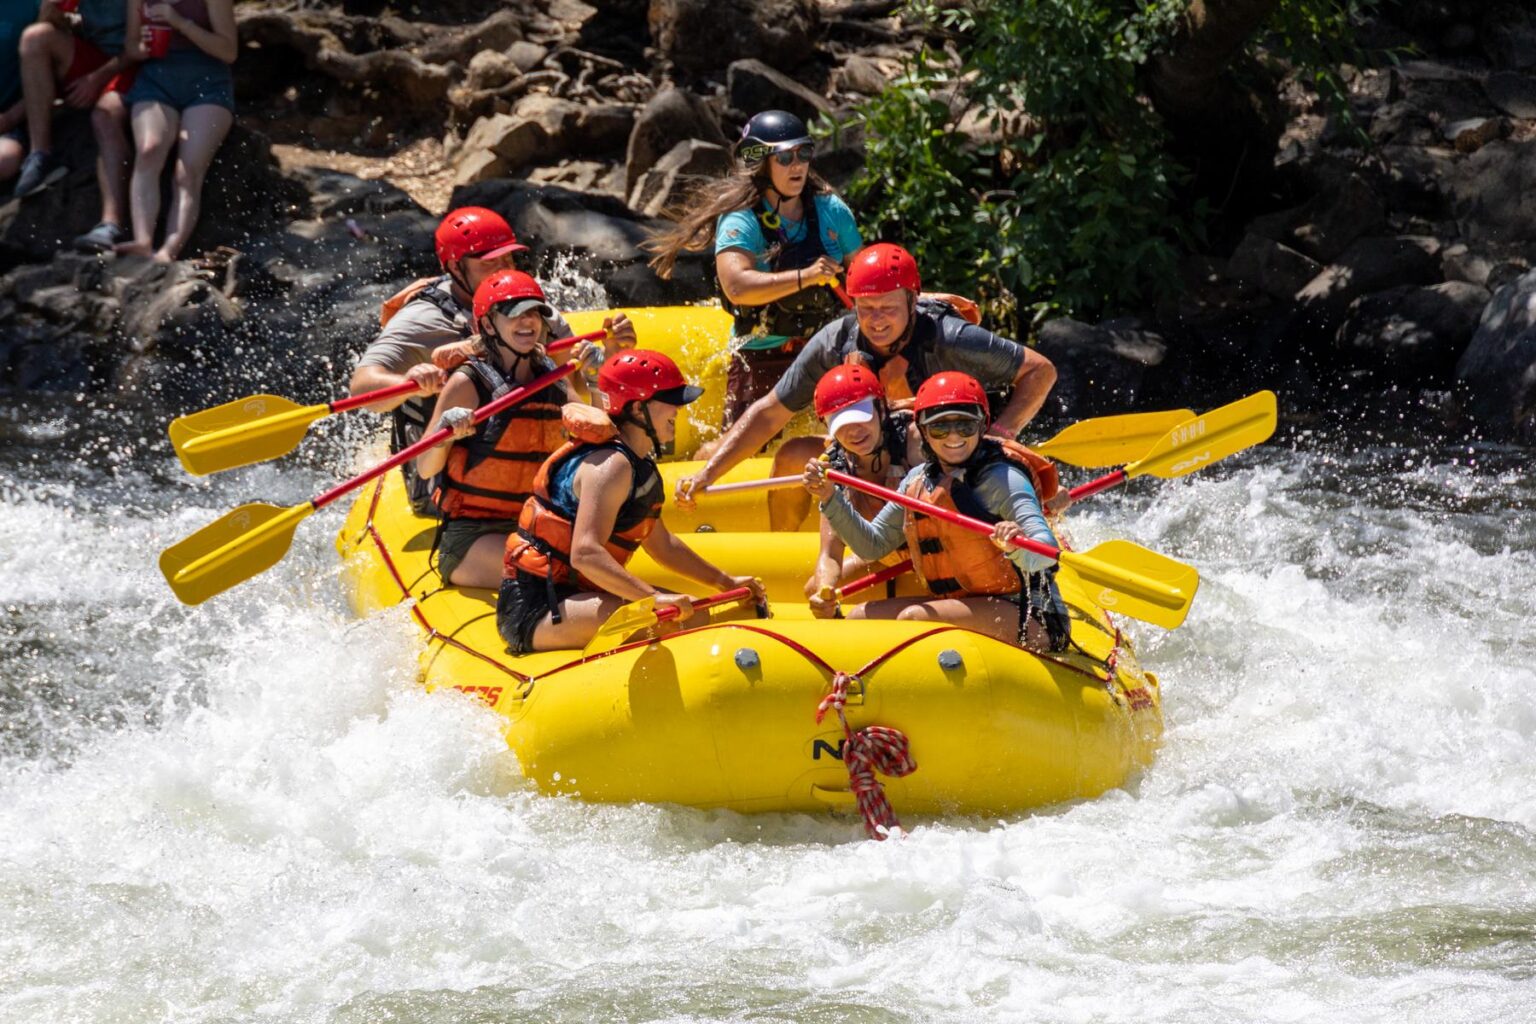 A yellow raft full of smiling people as they get ready to paddle through a rapid on the South Fork American River.